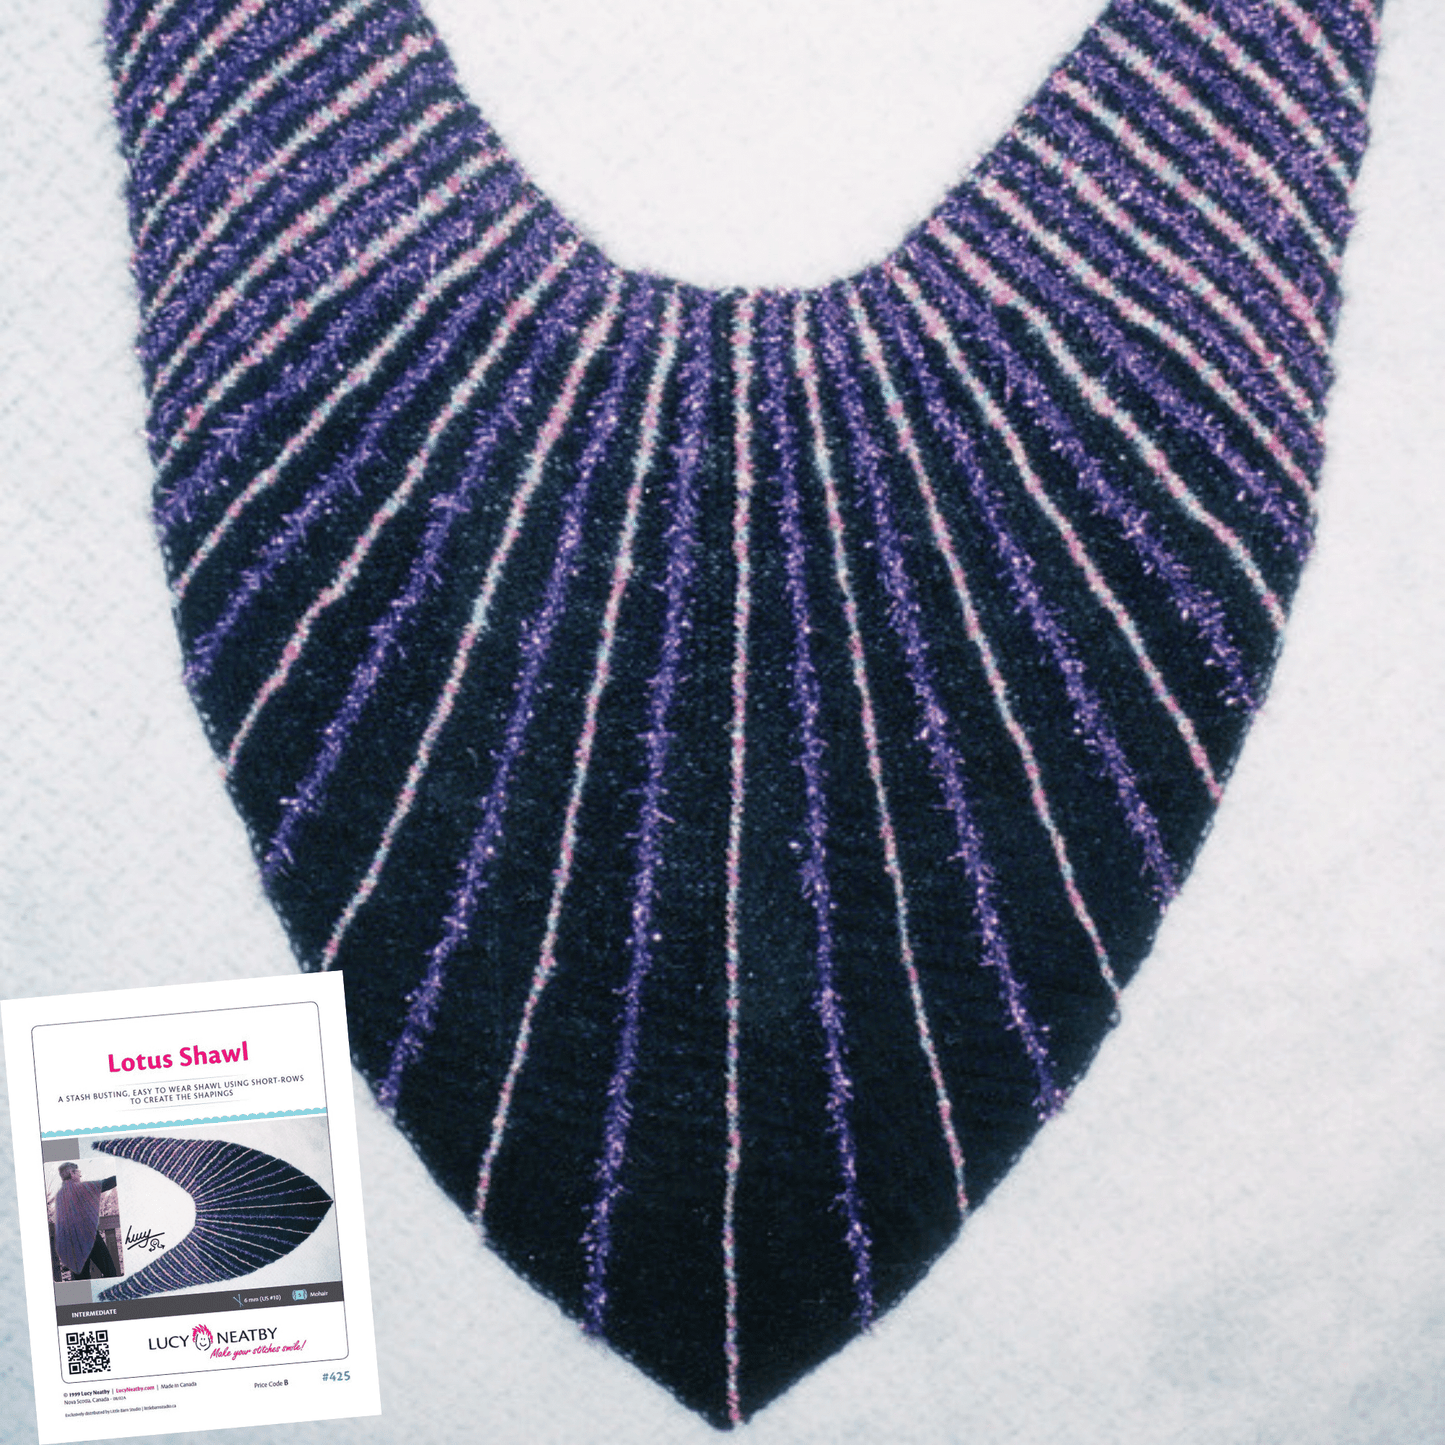 Lotus Shawl by Lucy Neatby - Digital Pattern